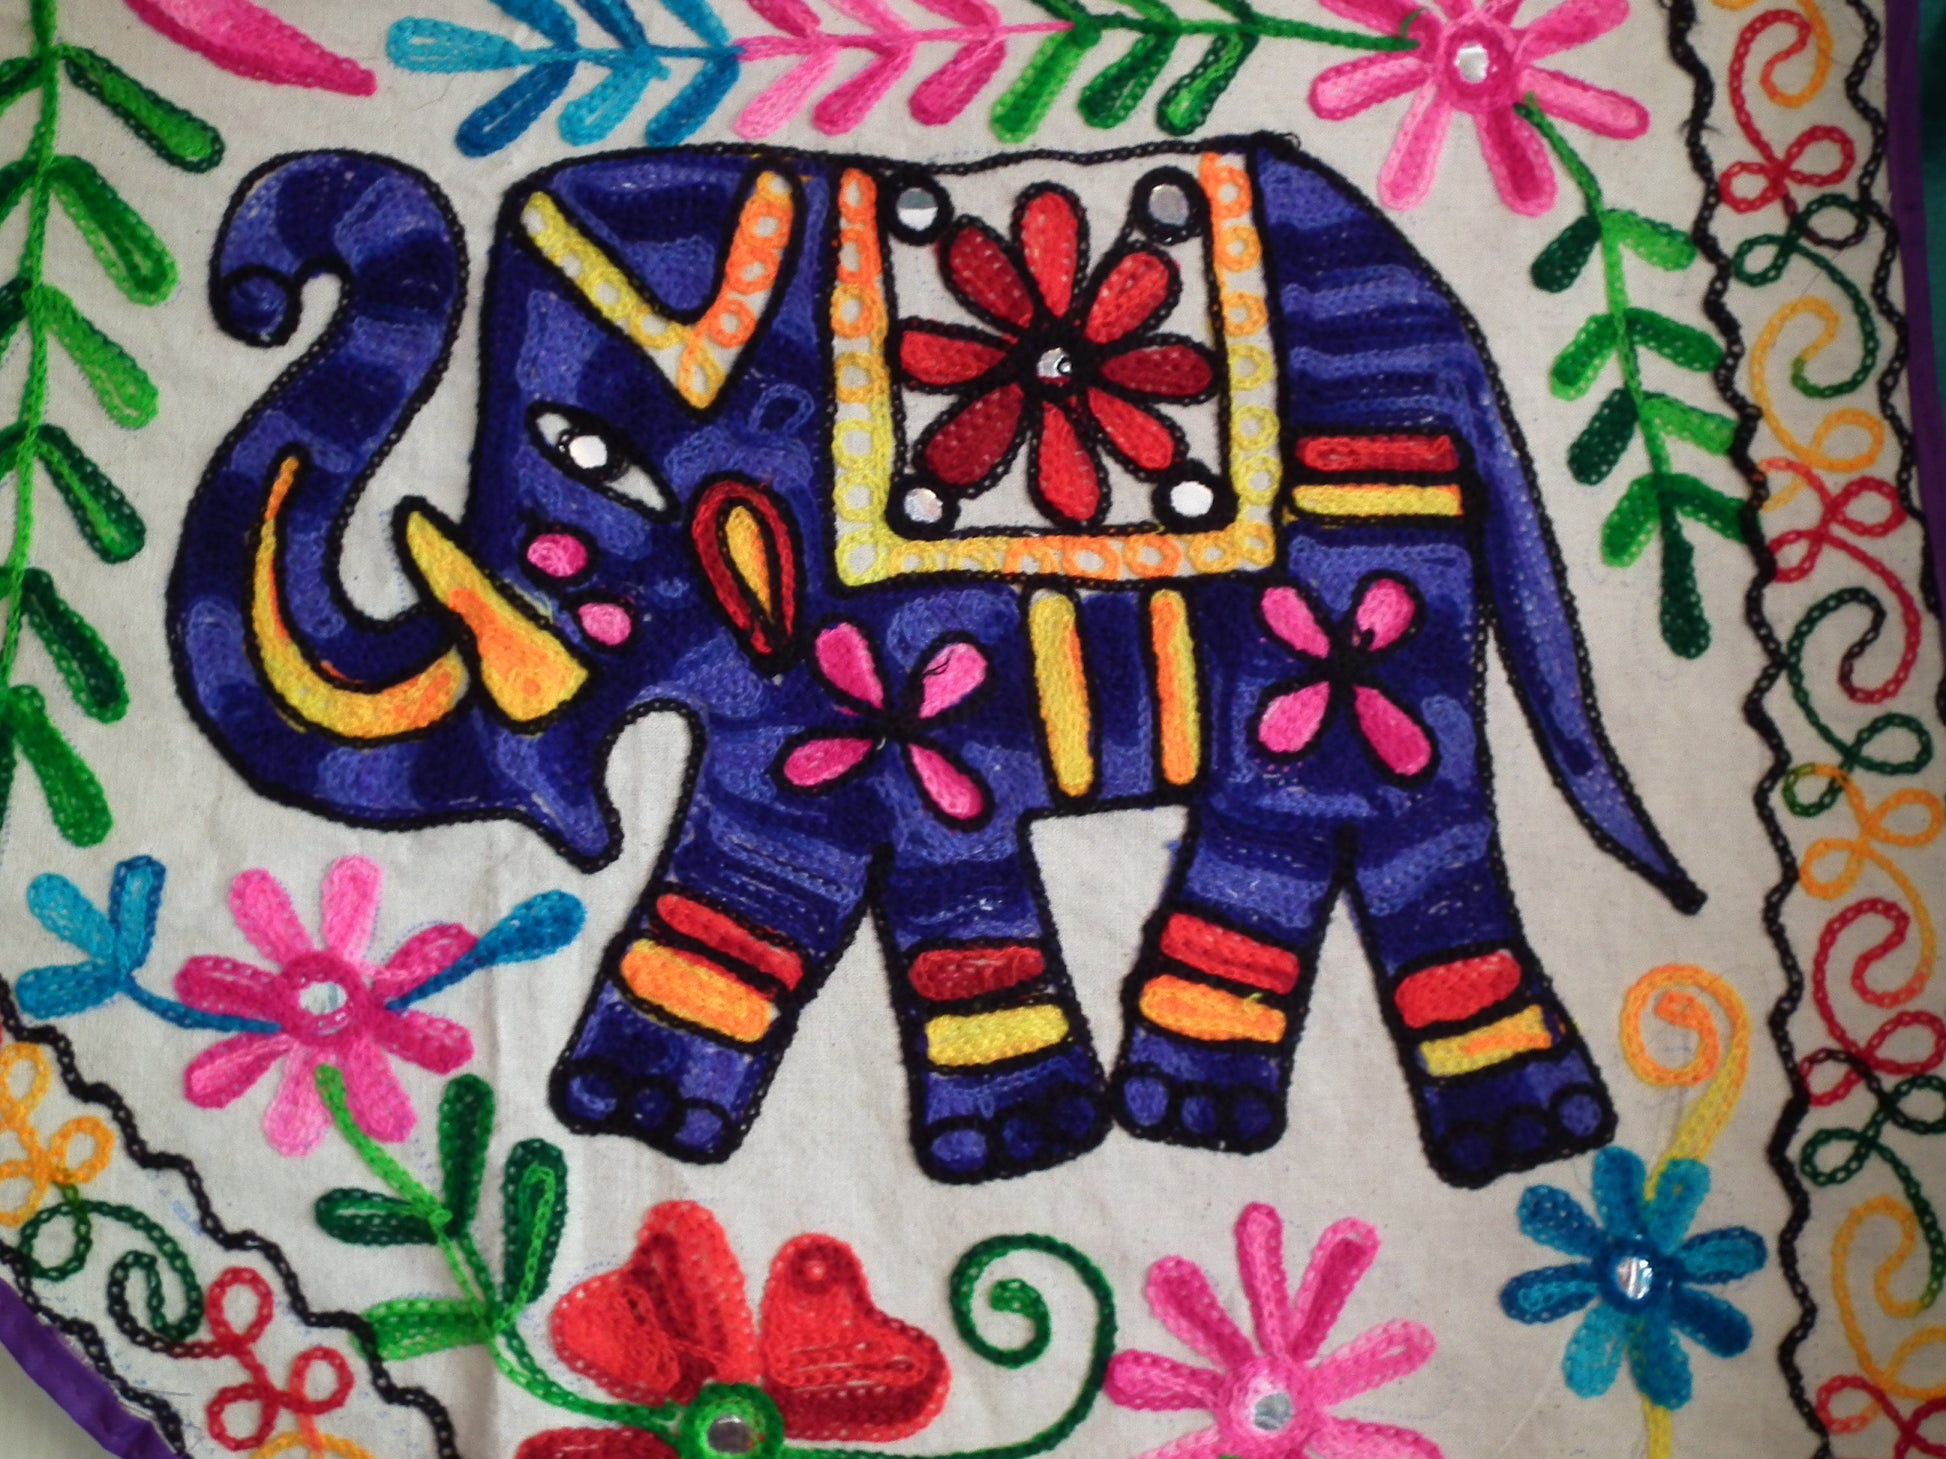 Hand-Made Wall Hanging Animal Temple-elephant 41" width/ length37"/15" drop at middle Wonkey Donkey Bazaar